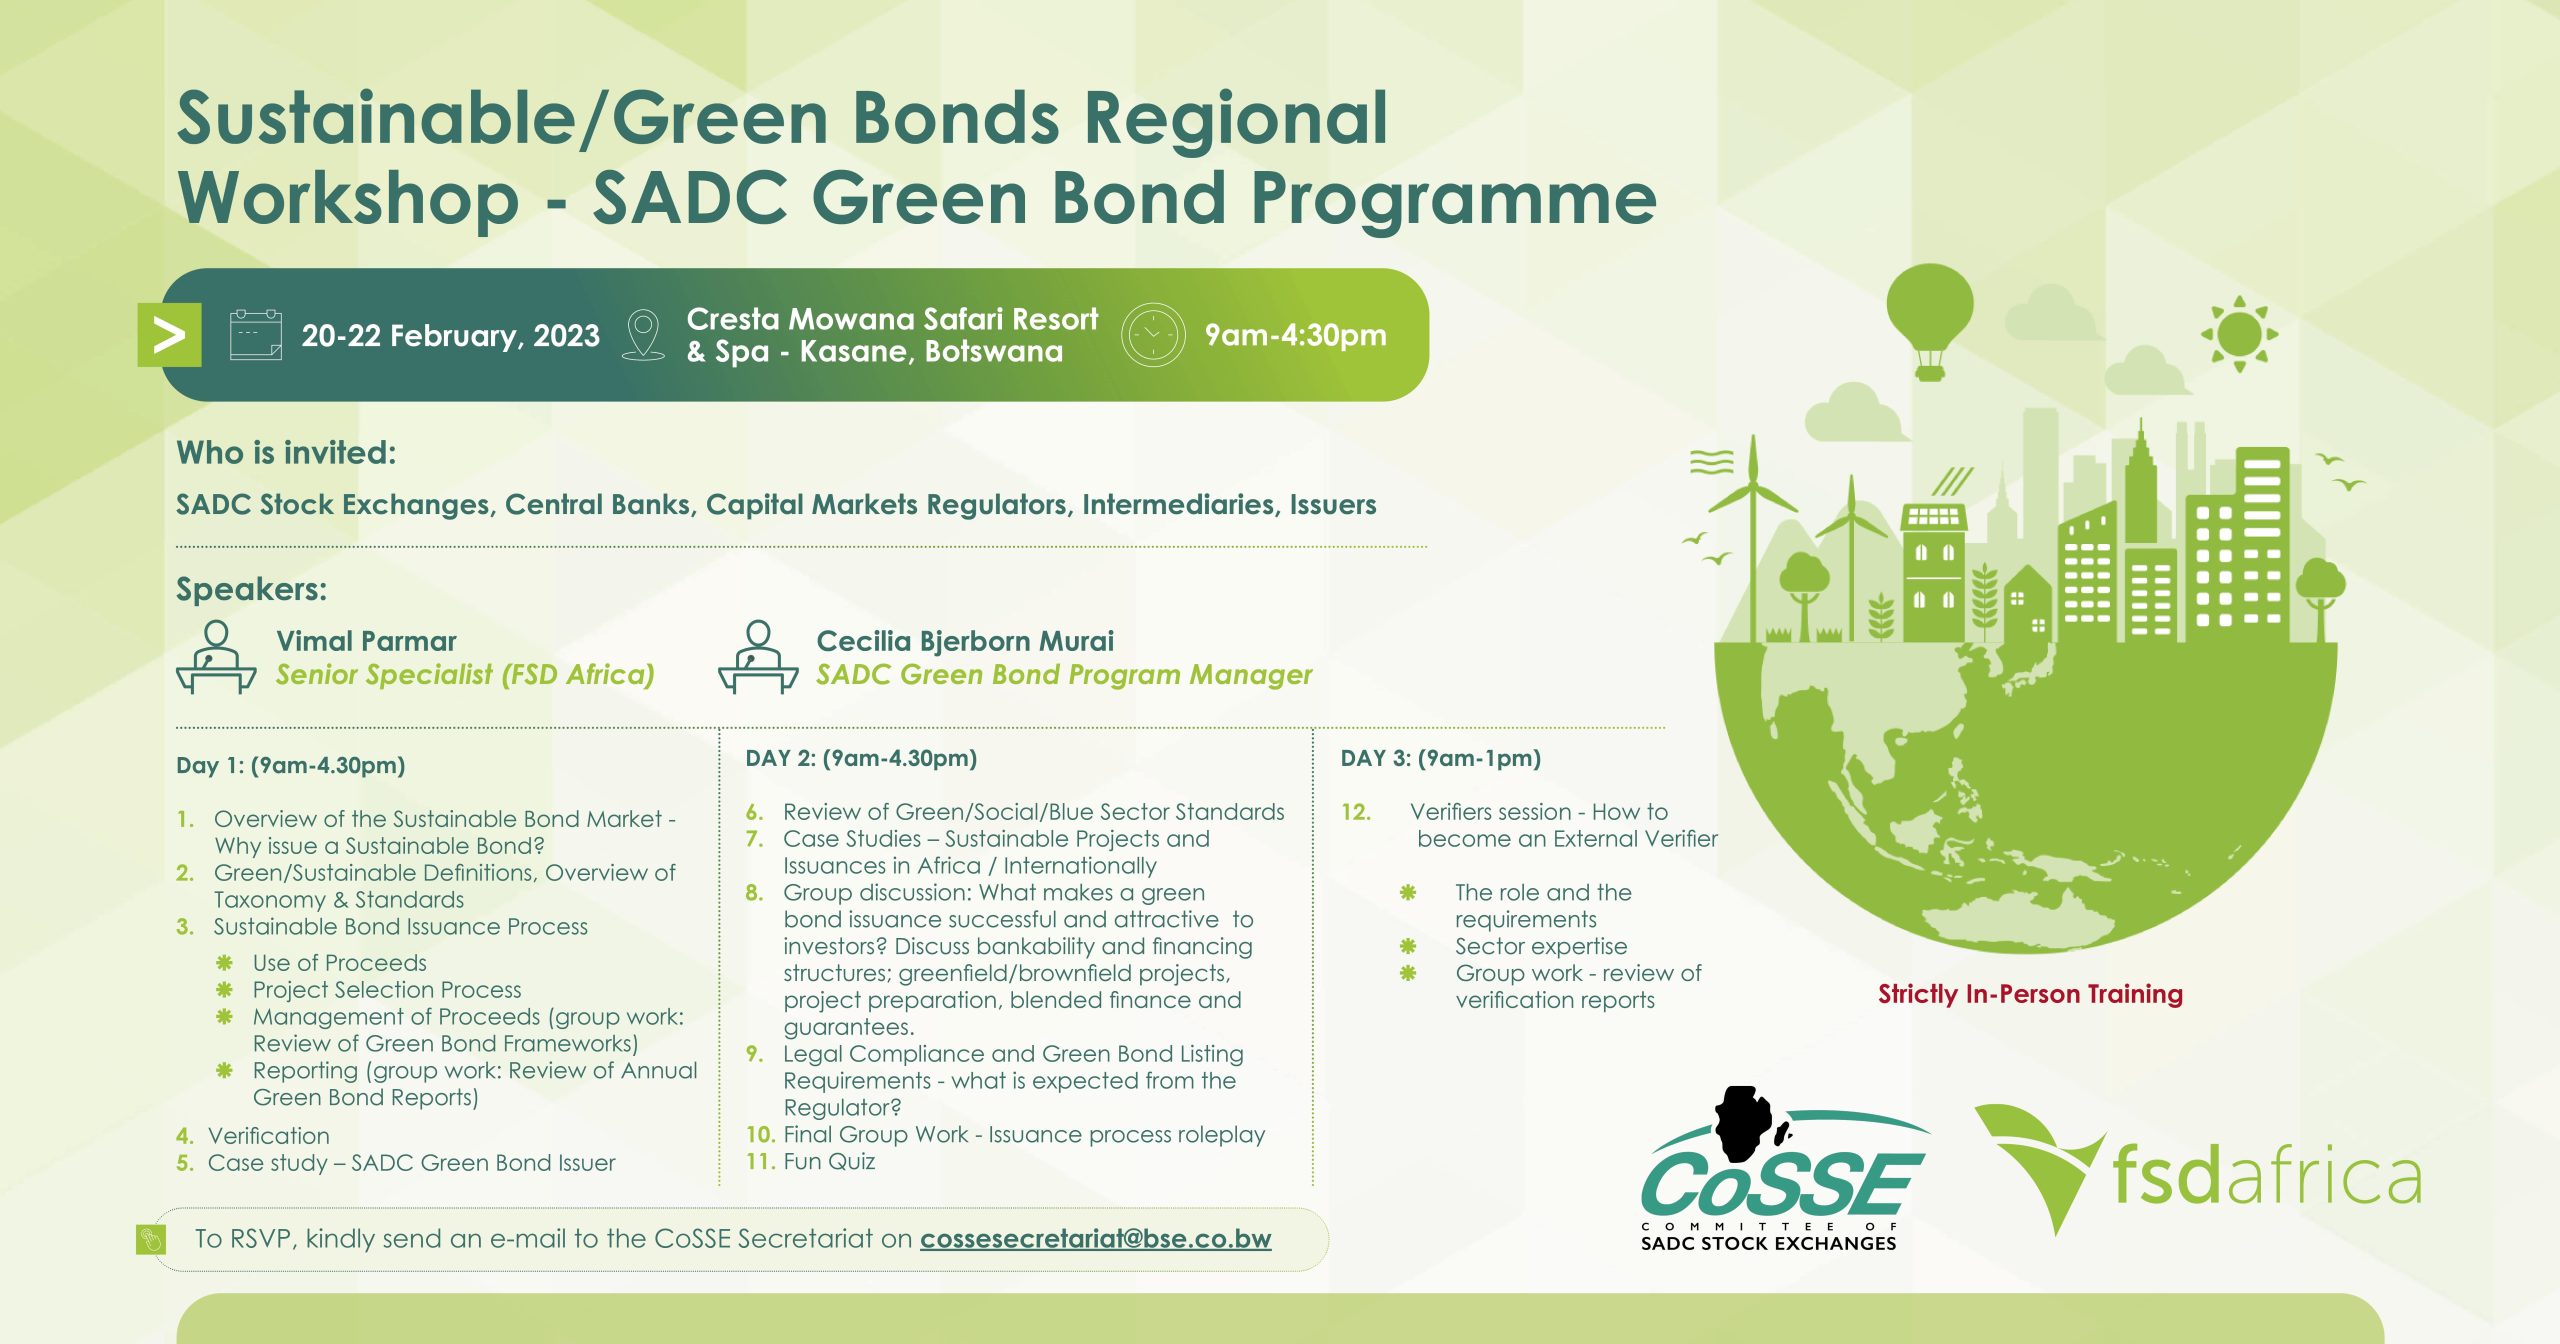 INVITATION TO ATTEND THE SUSTAINABLE/ GREEN BONDS REGIONAL WORKSHOP- SADC GREEN BOND PROGRAMME